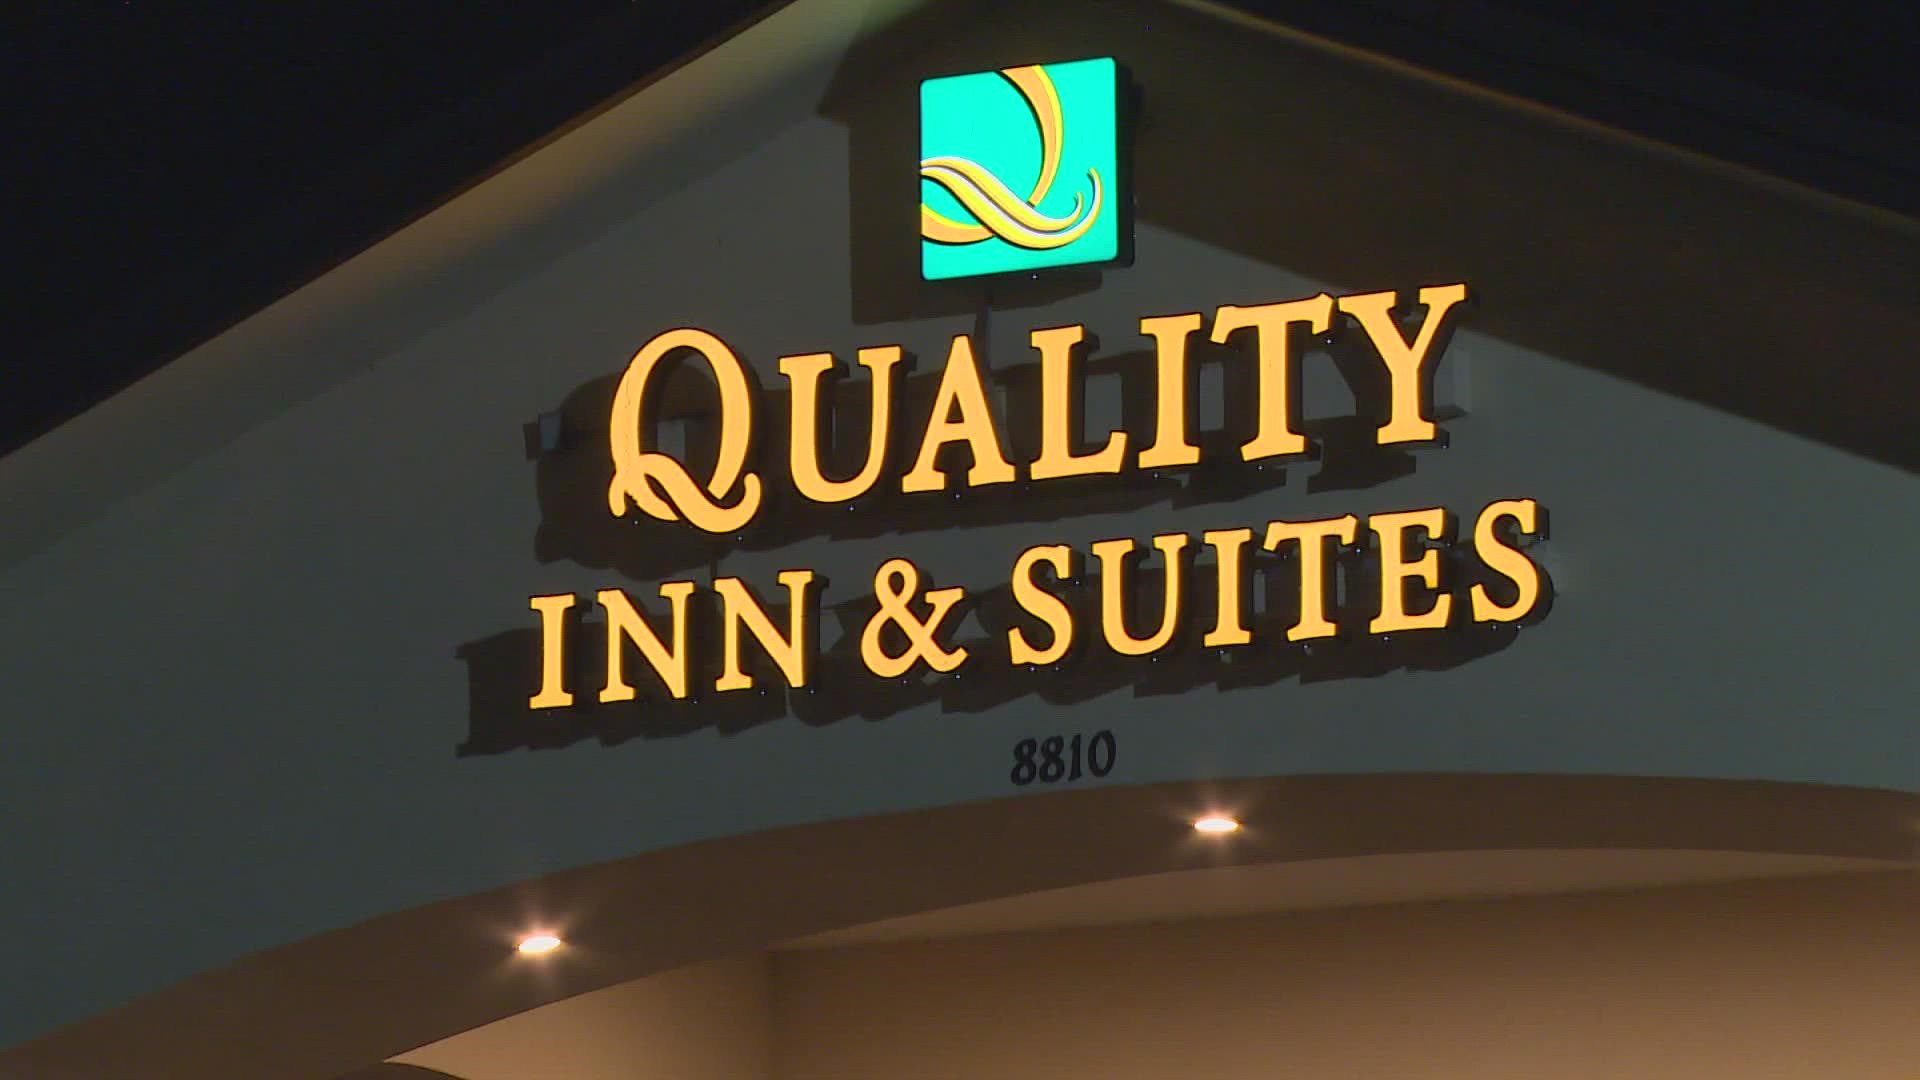 A Quality Inn in Tacoma was home to a chaotic scene when an employee was forced to shoot a man who was chasing her and two other employees with a knife